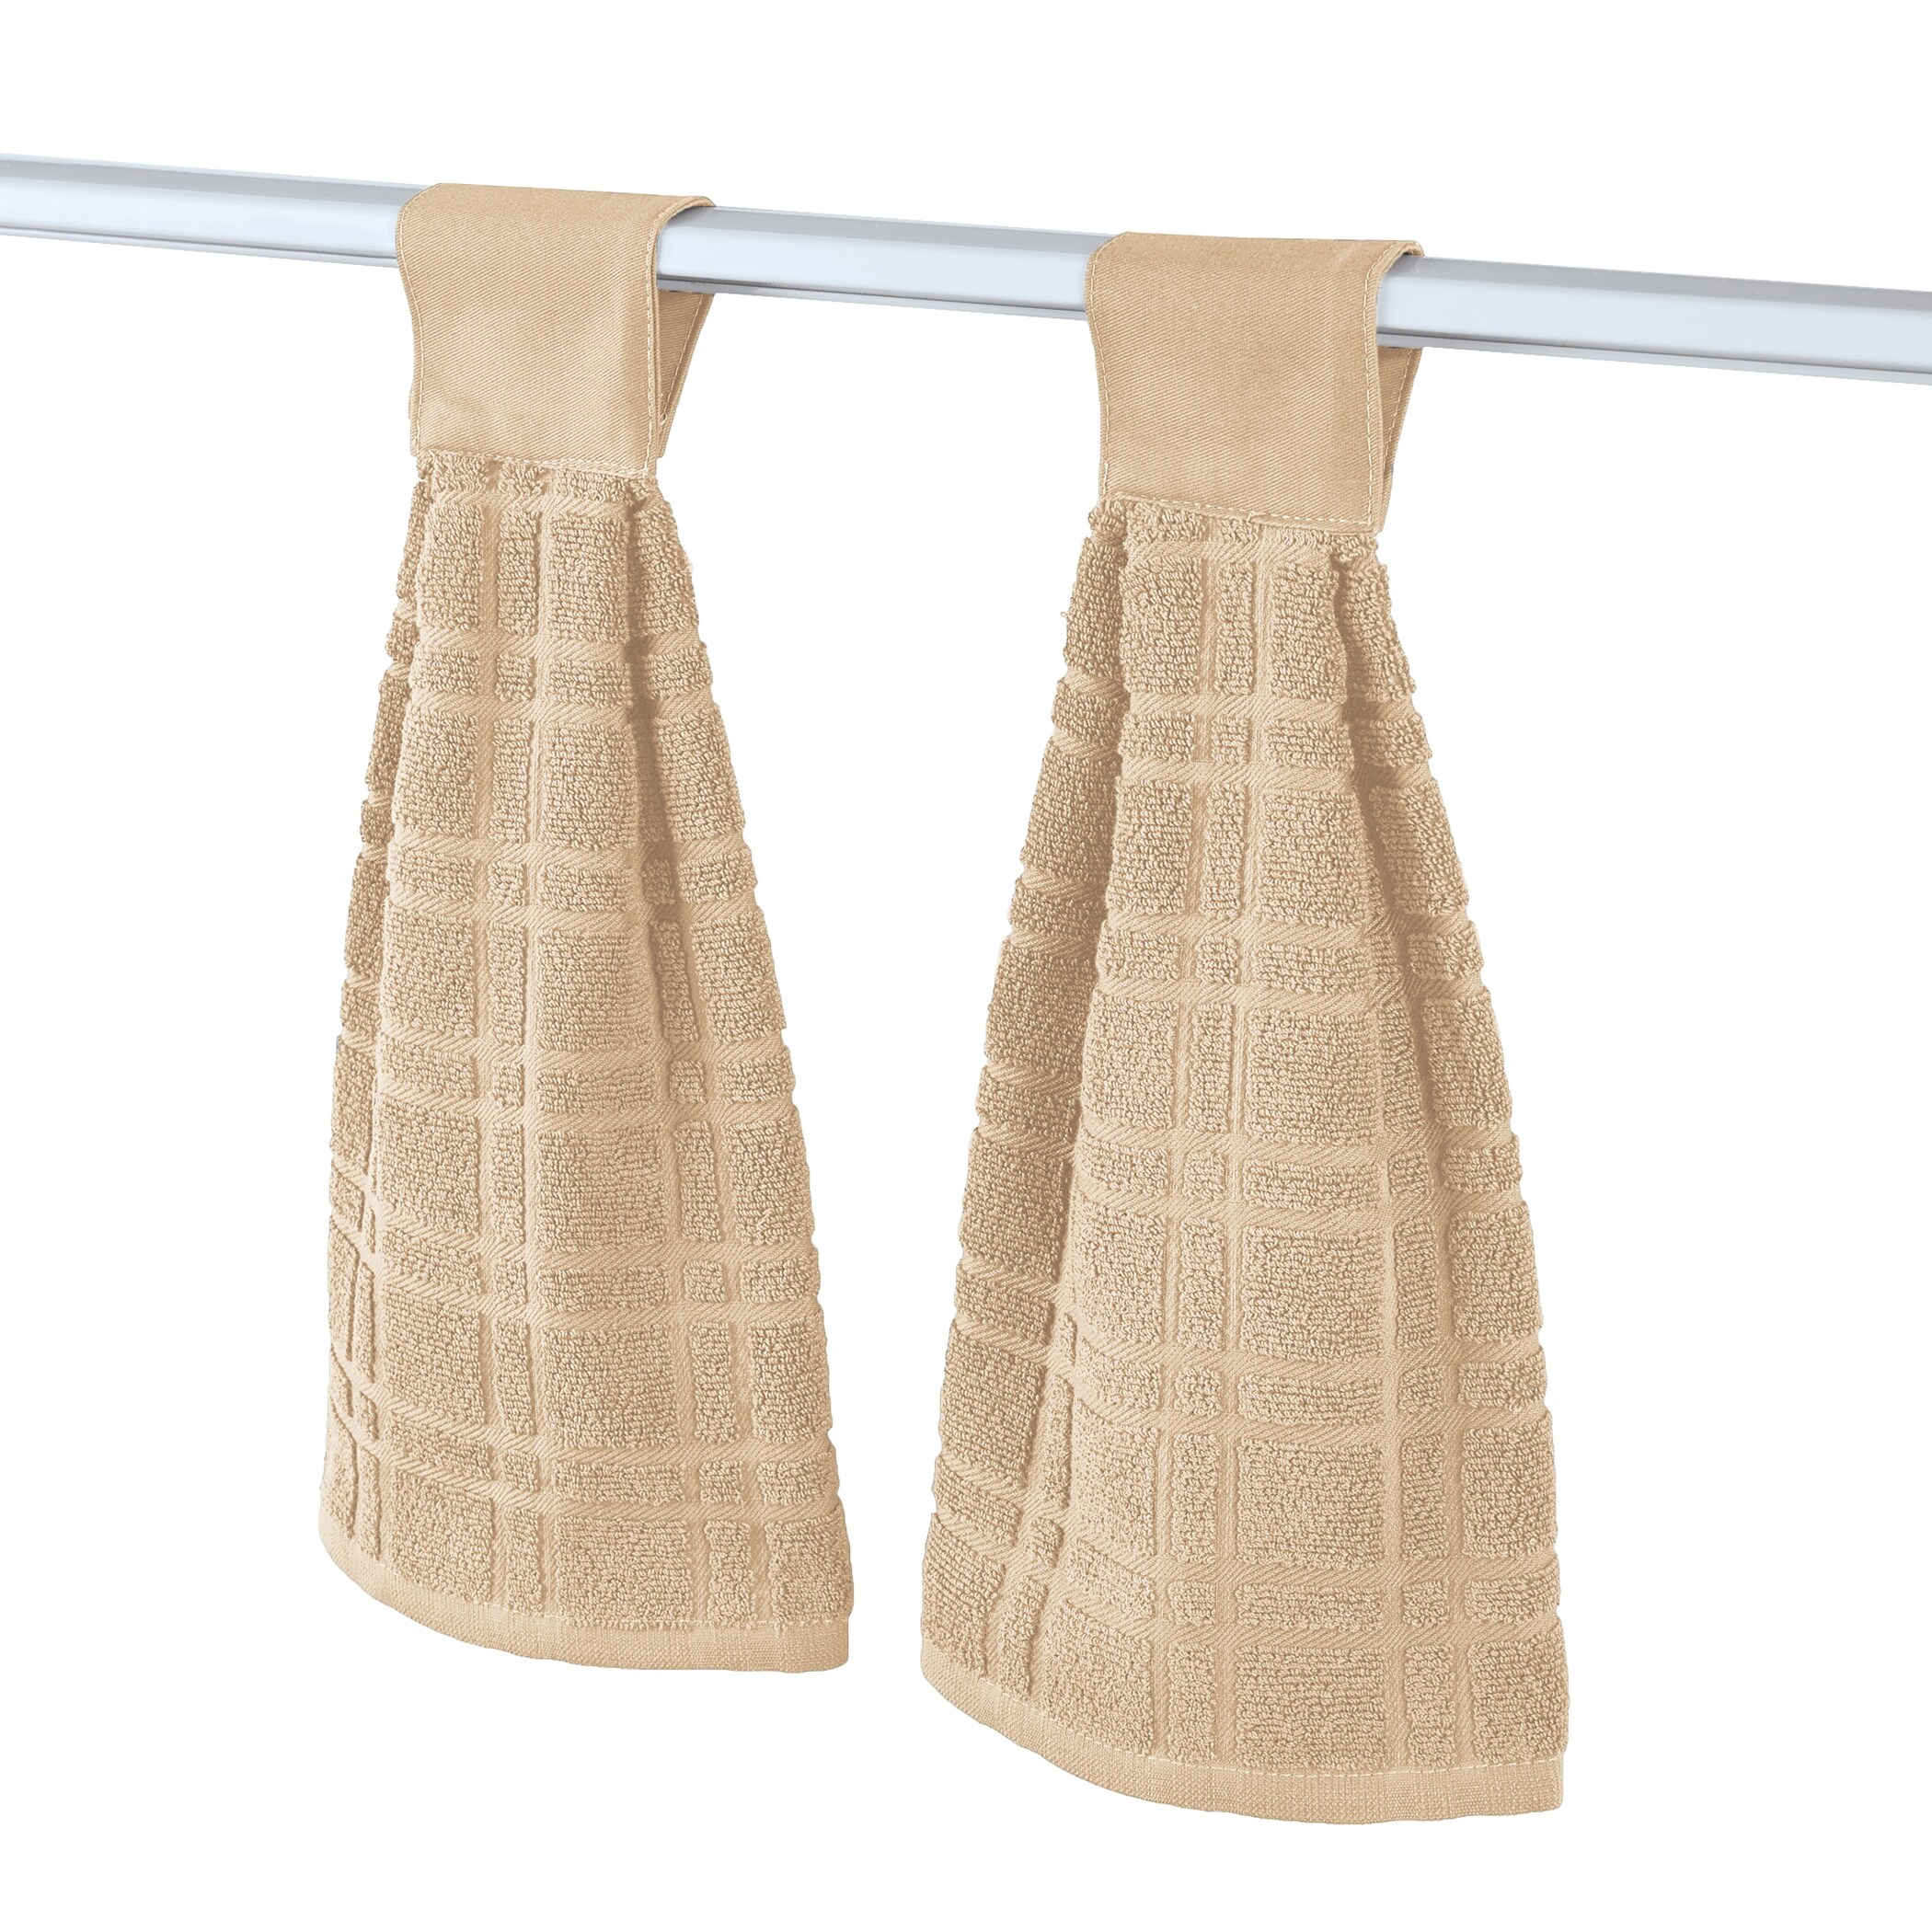 https://ak1.ostkcdn.com/images/products/is/images/direct/79191e200ef5c16c40838f6f654dc2147b4f3479/Hanging-Tufted-Design-Kitchen-Towels---Set-of-2.jpg